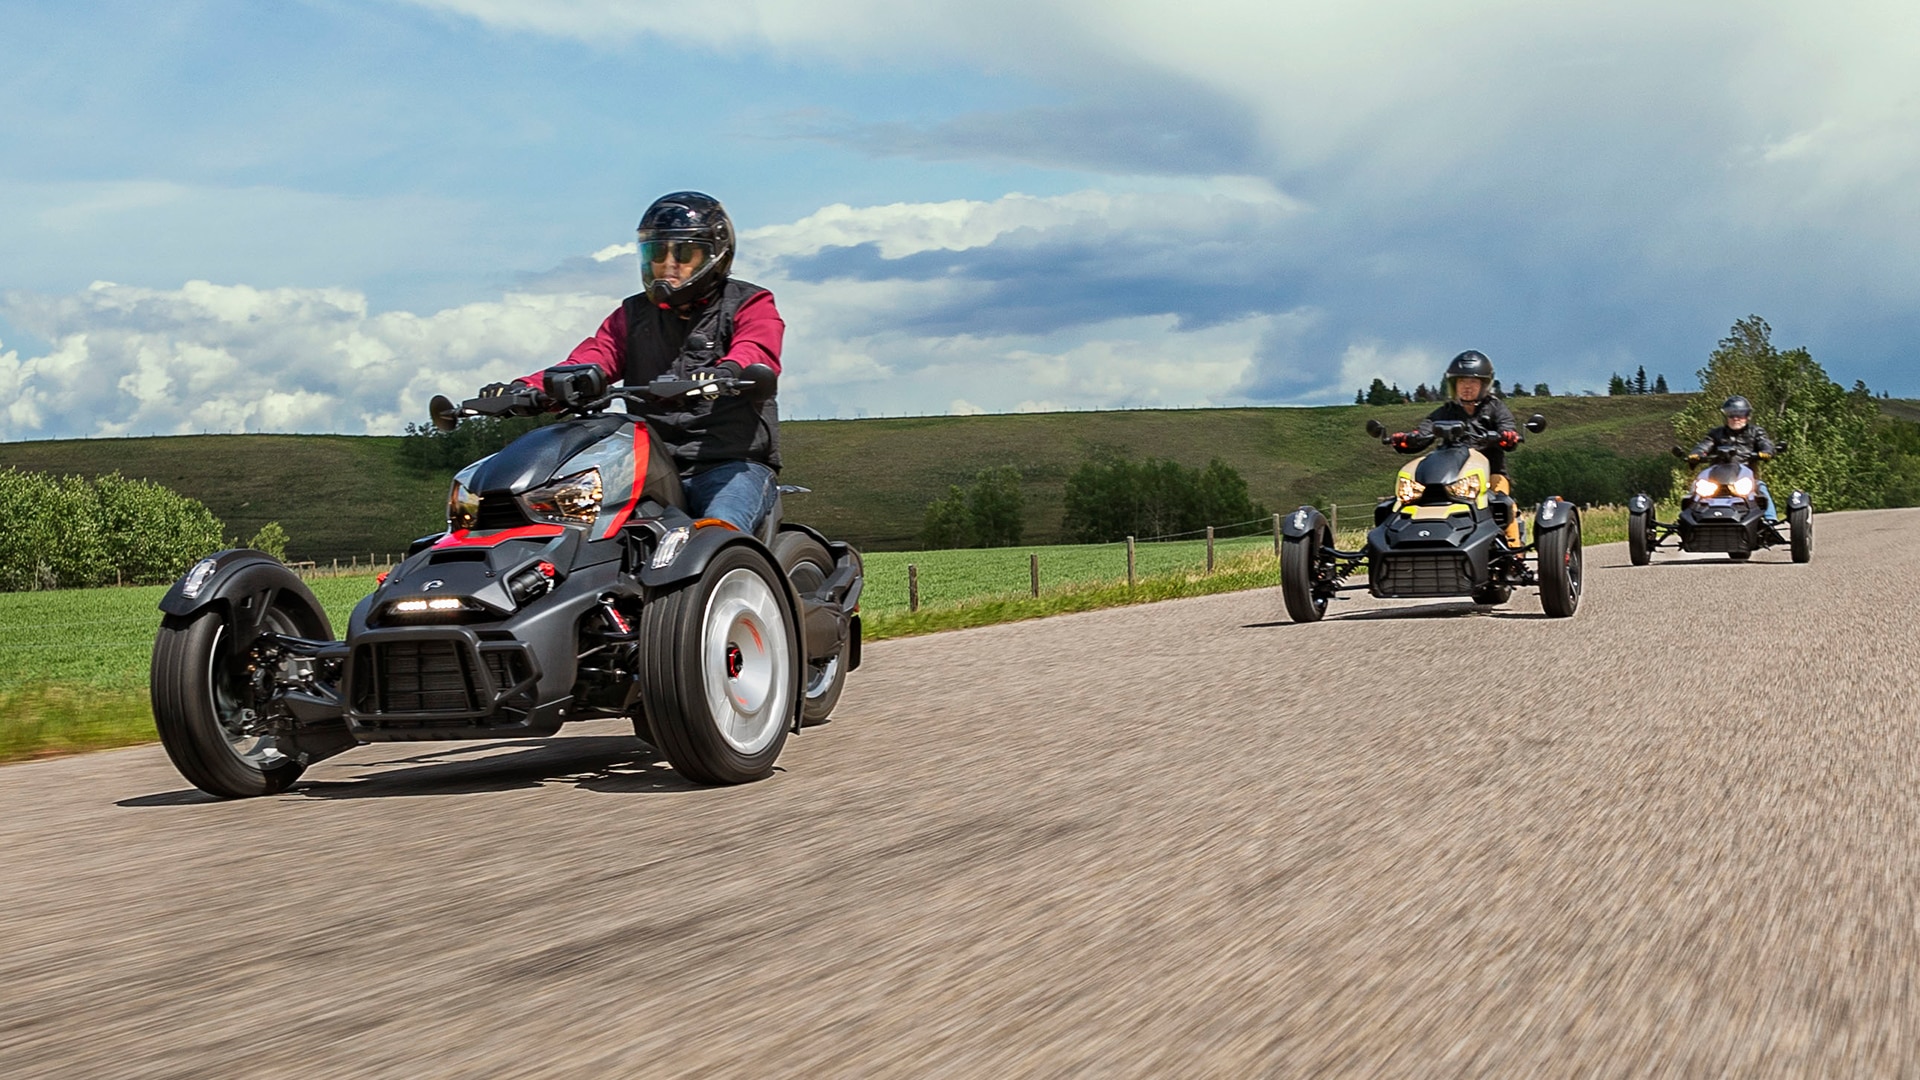 Three 3-wheel Can-Am On-Road vehicles driving on street